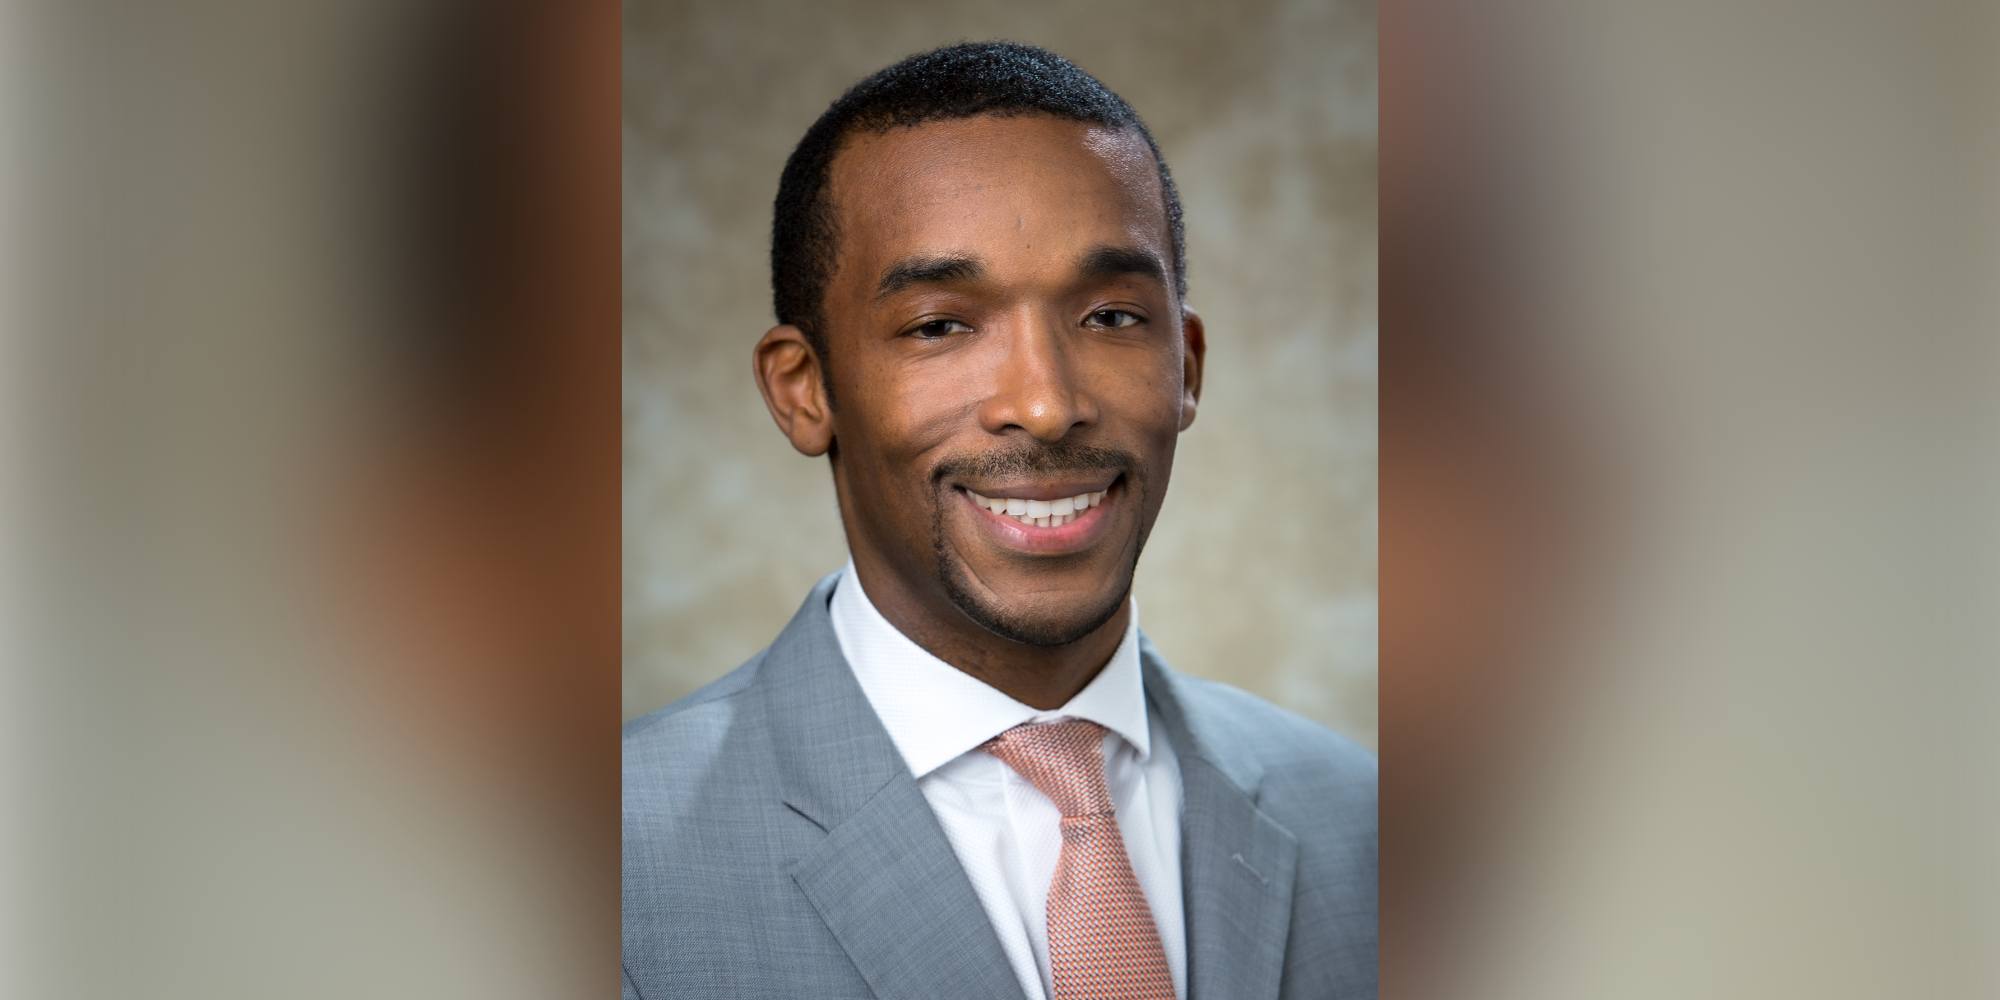 School of Medicine Professor Dr. Bonzo Reddick Appointed to New Statewide COVID-19 Health Equity Council